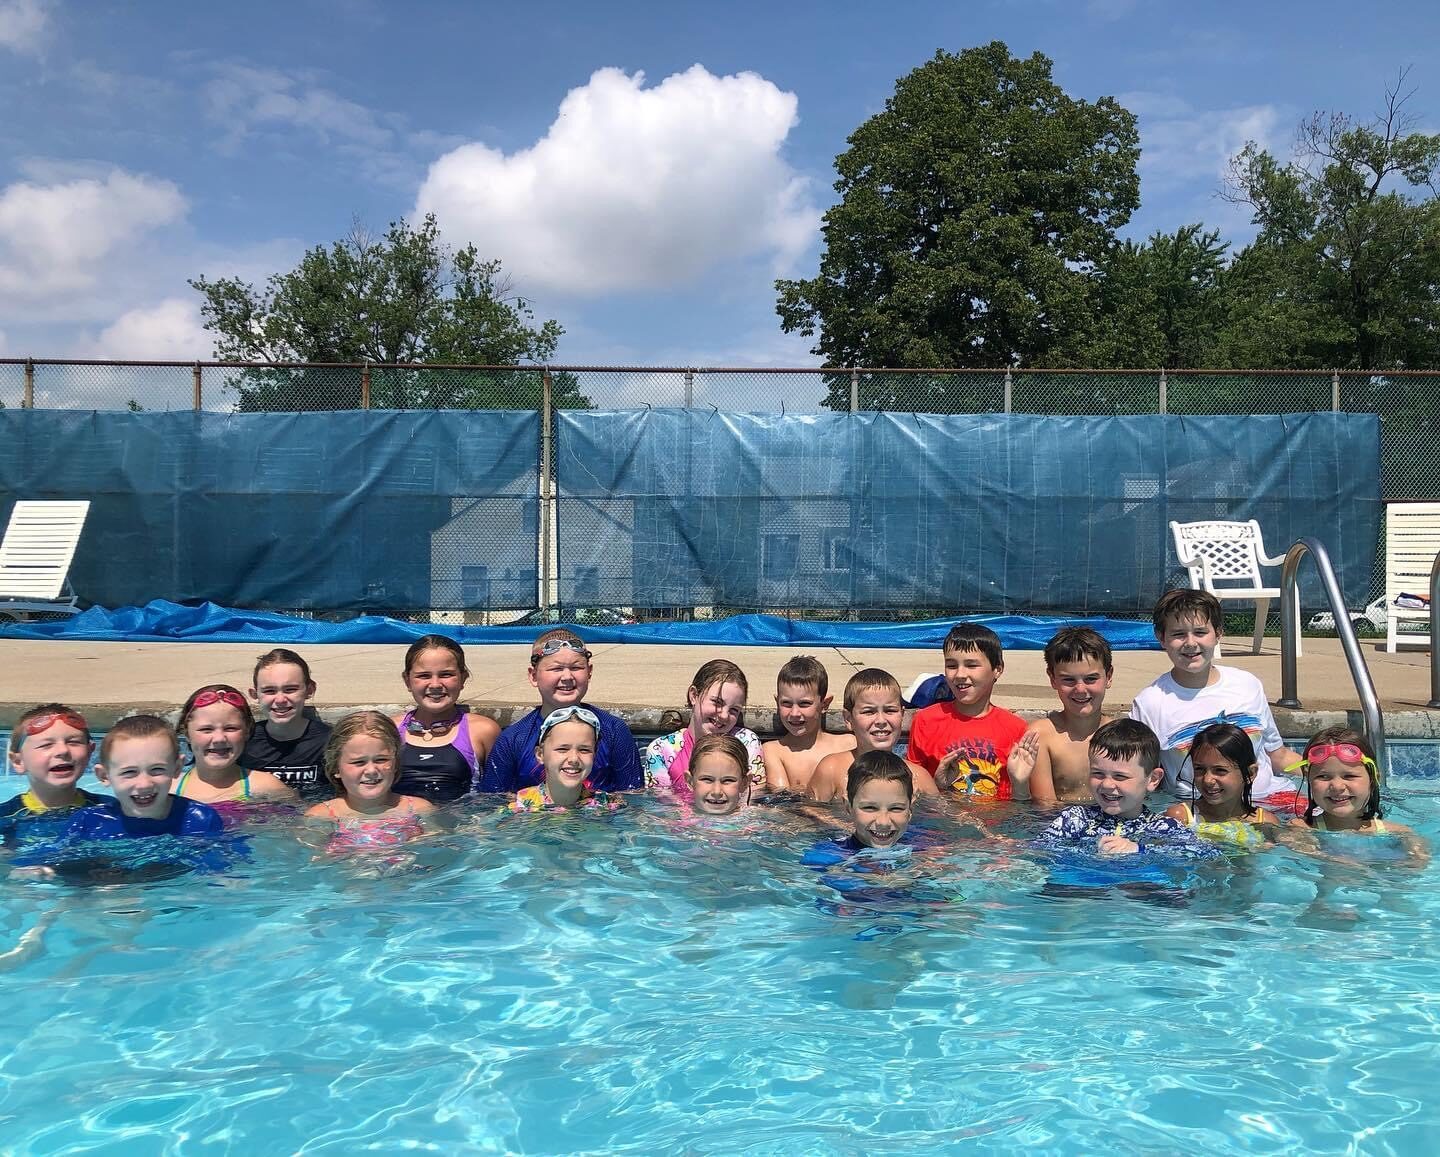 Picture of 19 Jr. Swim Team boys and girls in the water after practice. they are all smiling at the camera and it is sunny outside. They are the outdoor pool in evergreen park.